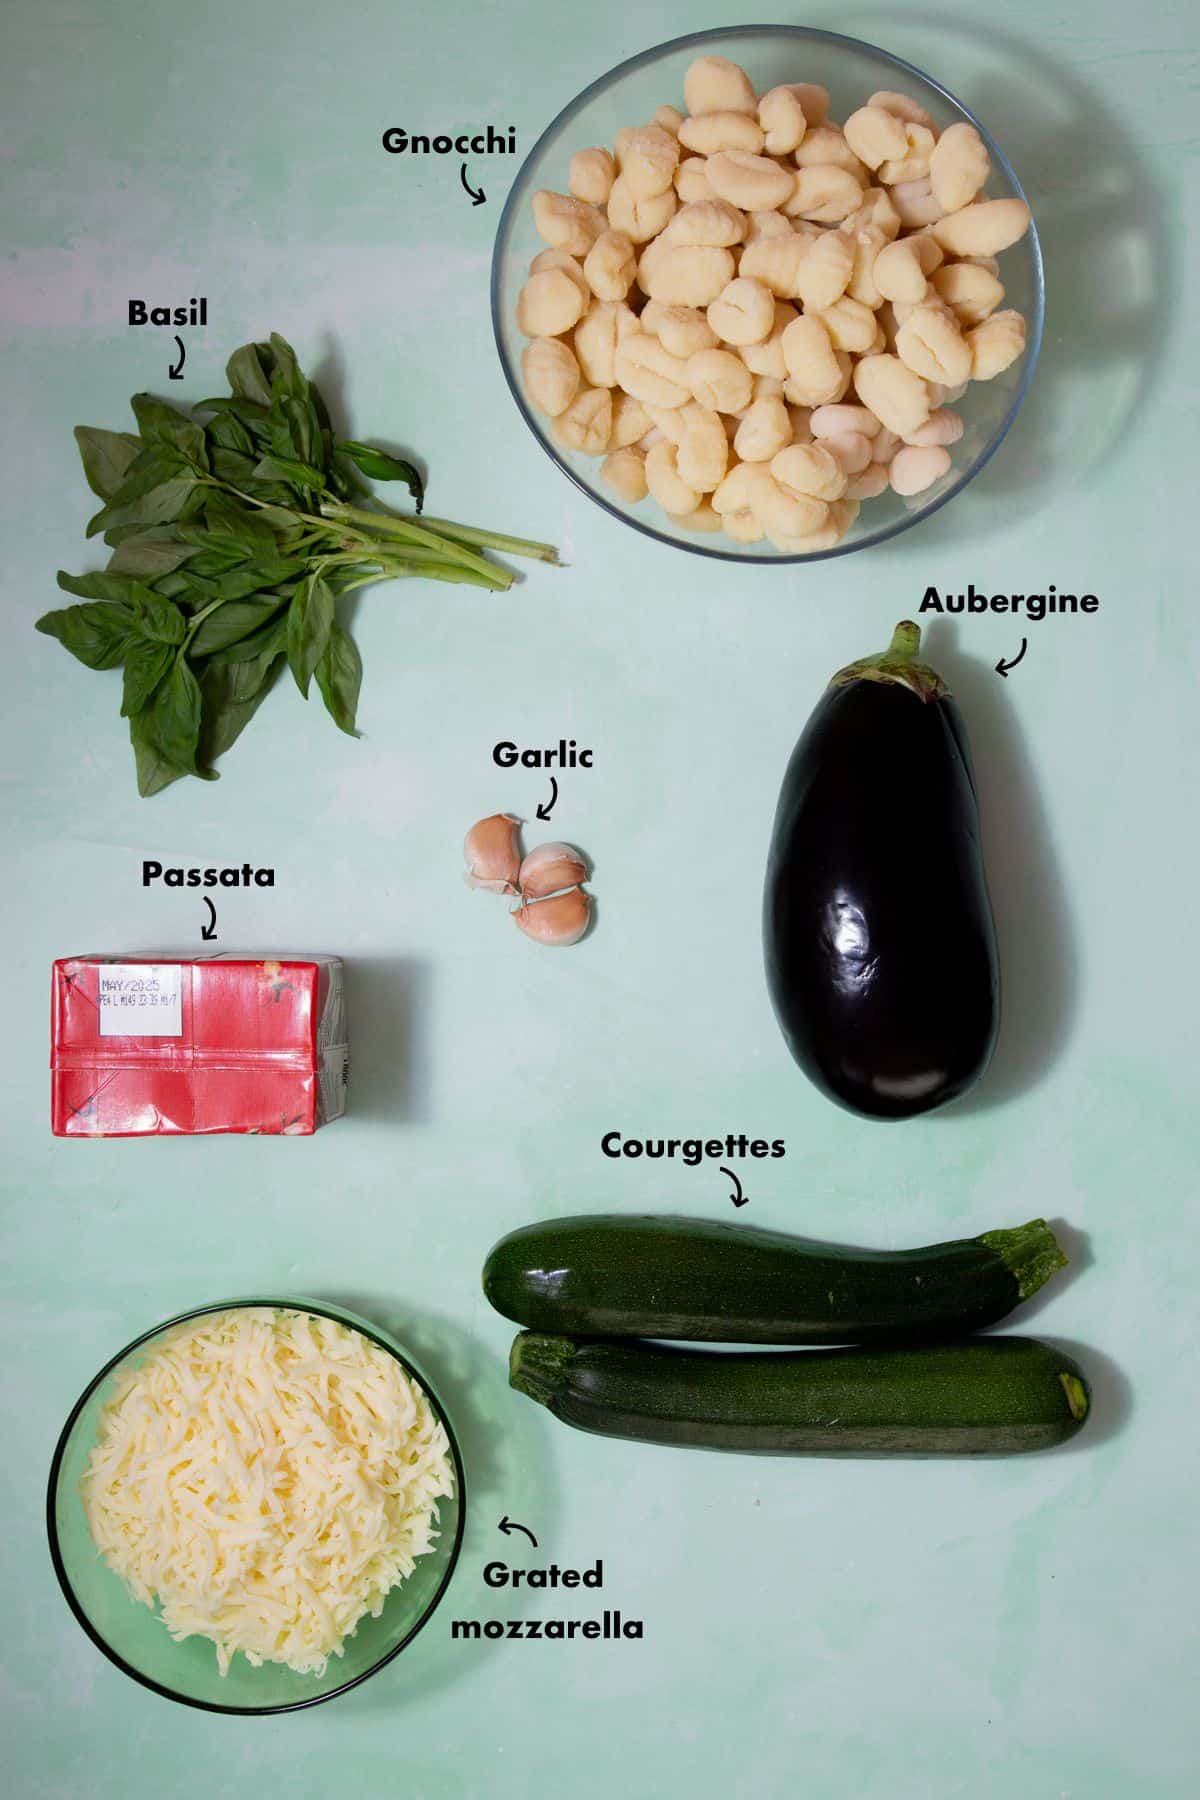 Ingredients to make gnocchi recipe laid out on a pale blue background and labelled.